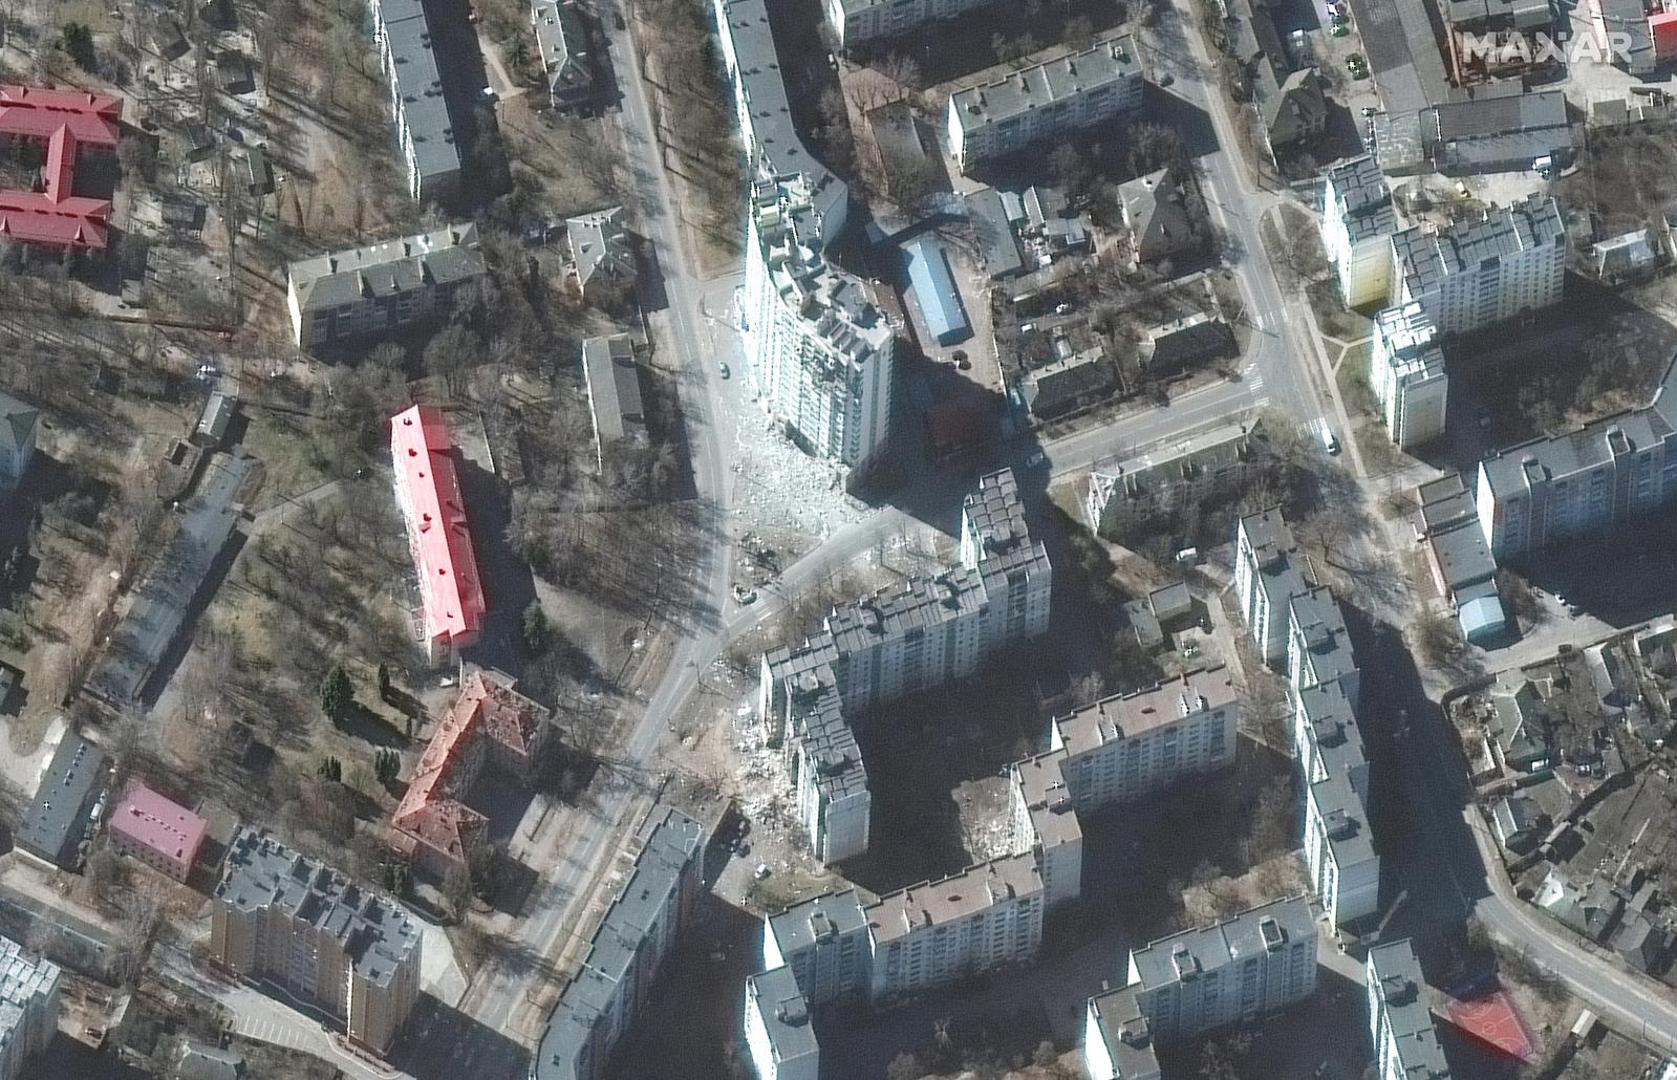 Satellite view of heavily damaged high-rise apartment buildings in Chernihiv, as Russia's invasion of Ukraine continues, March 18, 2022 in this handout. Satellite image (C) 2022 Maxar Technologies/Handout via REUTERS ATTENTION EDITORS - THIS IMAGE HAS BEEN SUPPLIED BY A THIRD PARTY. MANDATORY CREDIT. WATERMARK MAY NOT BE REMOVED/CROPPED. NO RESALES. NO ARCHIVES Photo: MAXAR TECHNOLOGIES/REUTERS